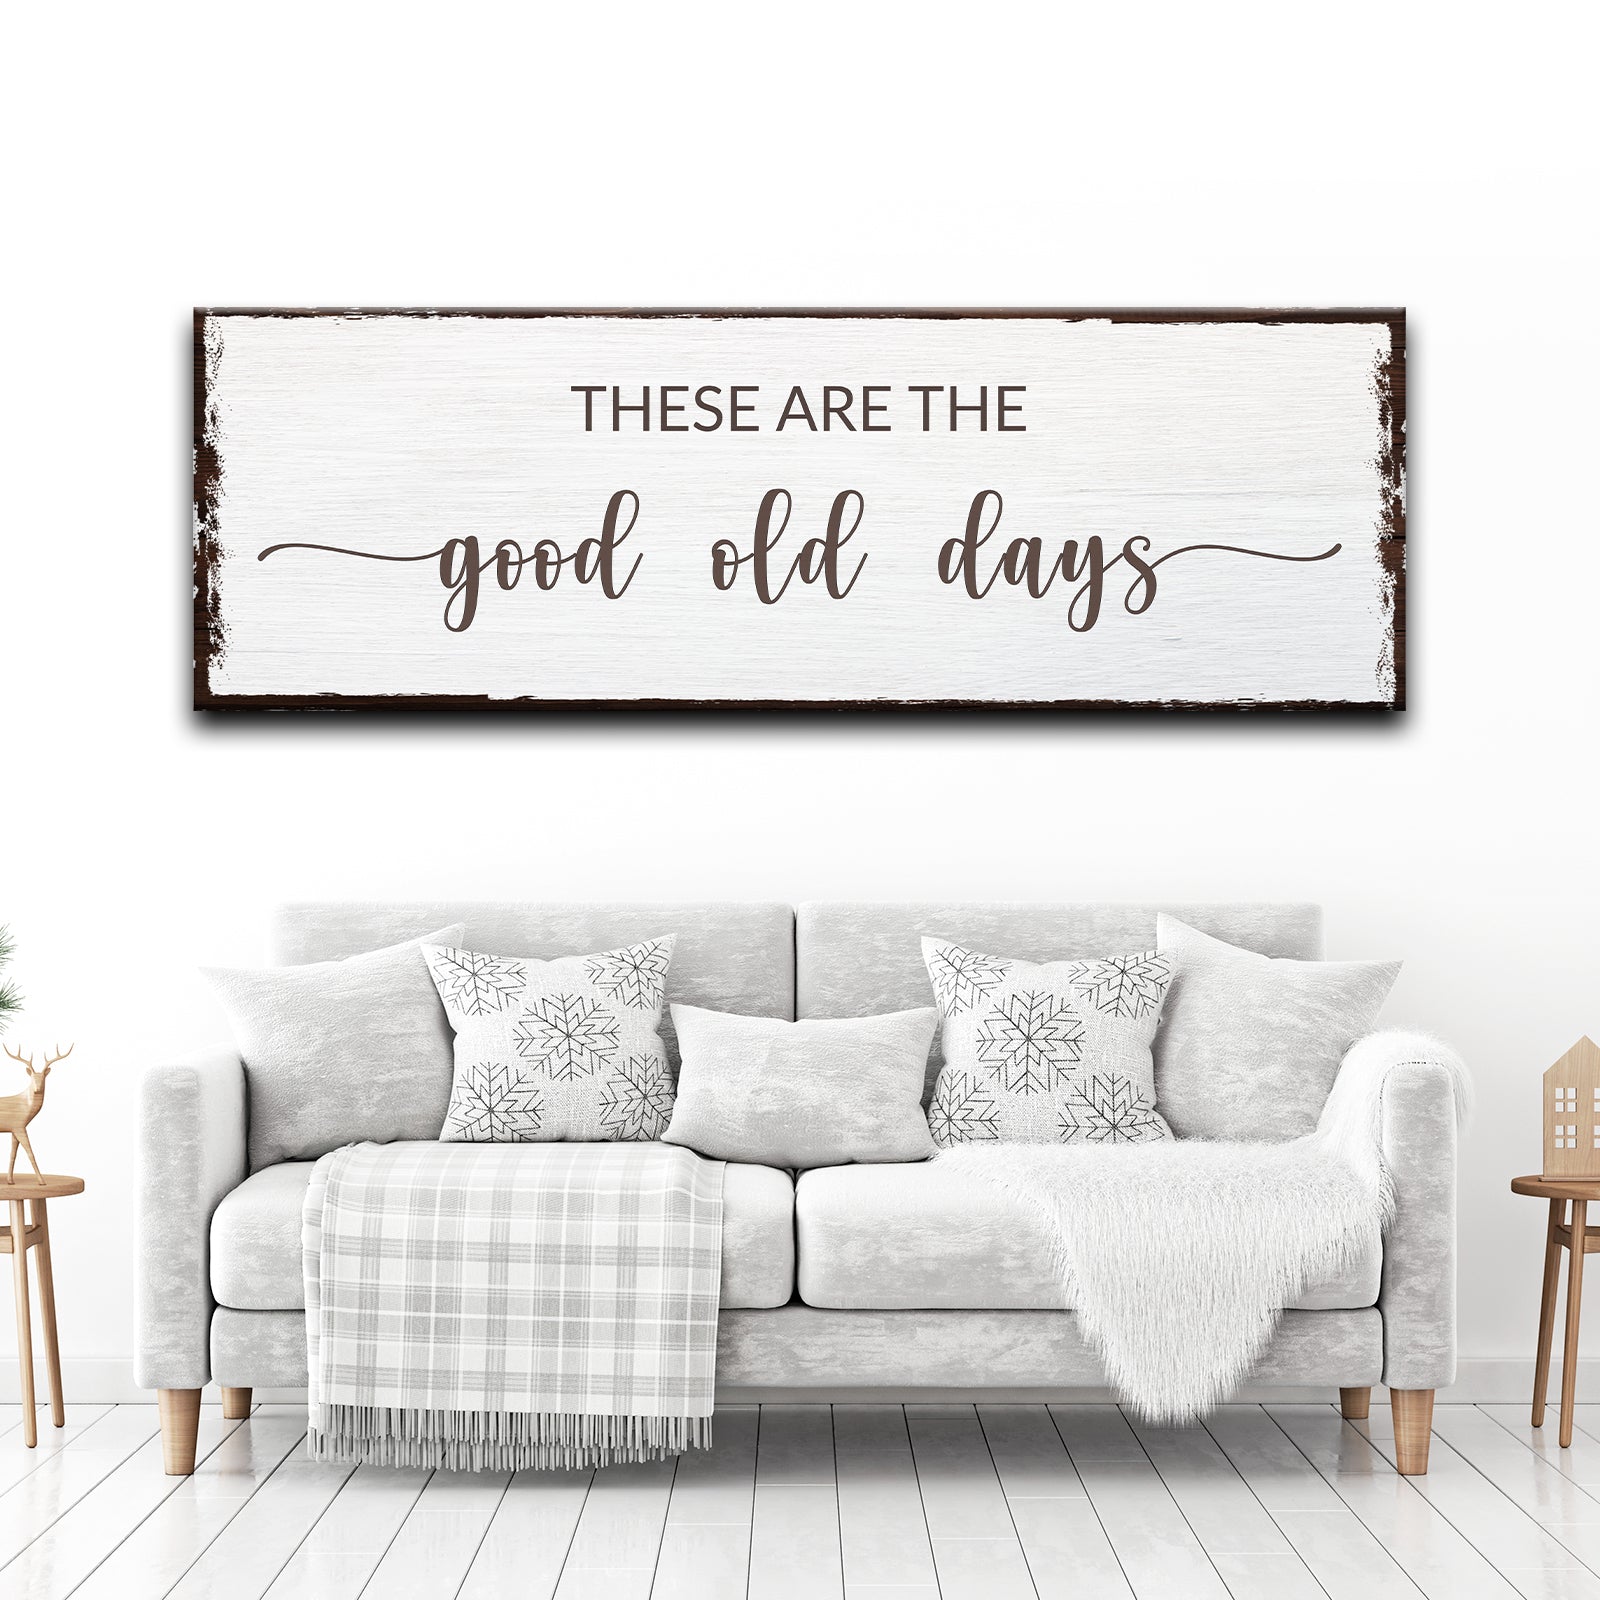 These are the Good Old Days Sign IV - Image by Tailored Canvases